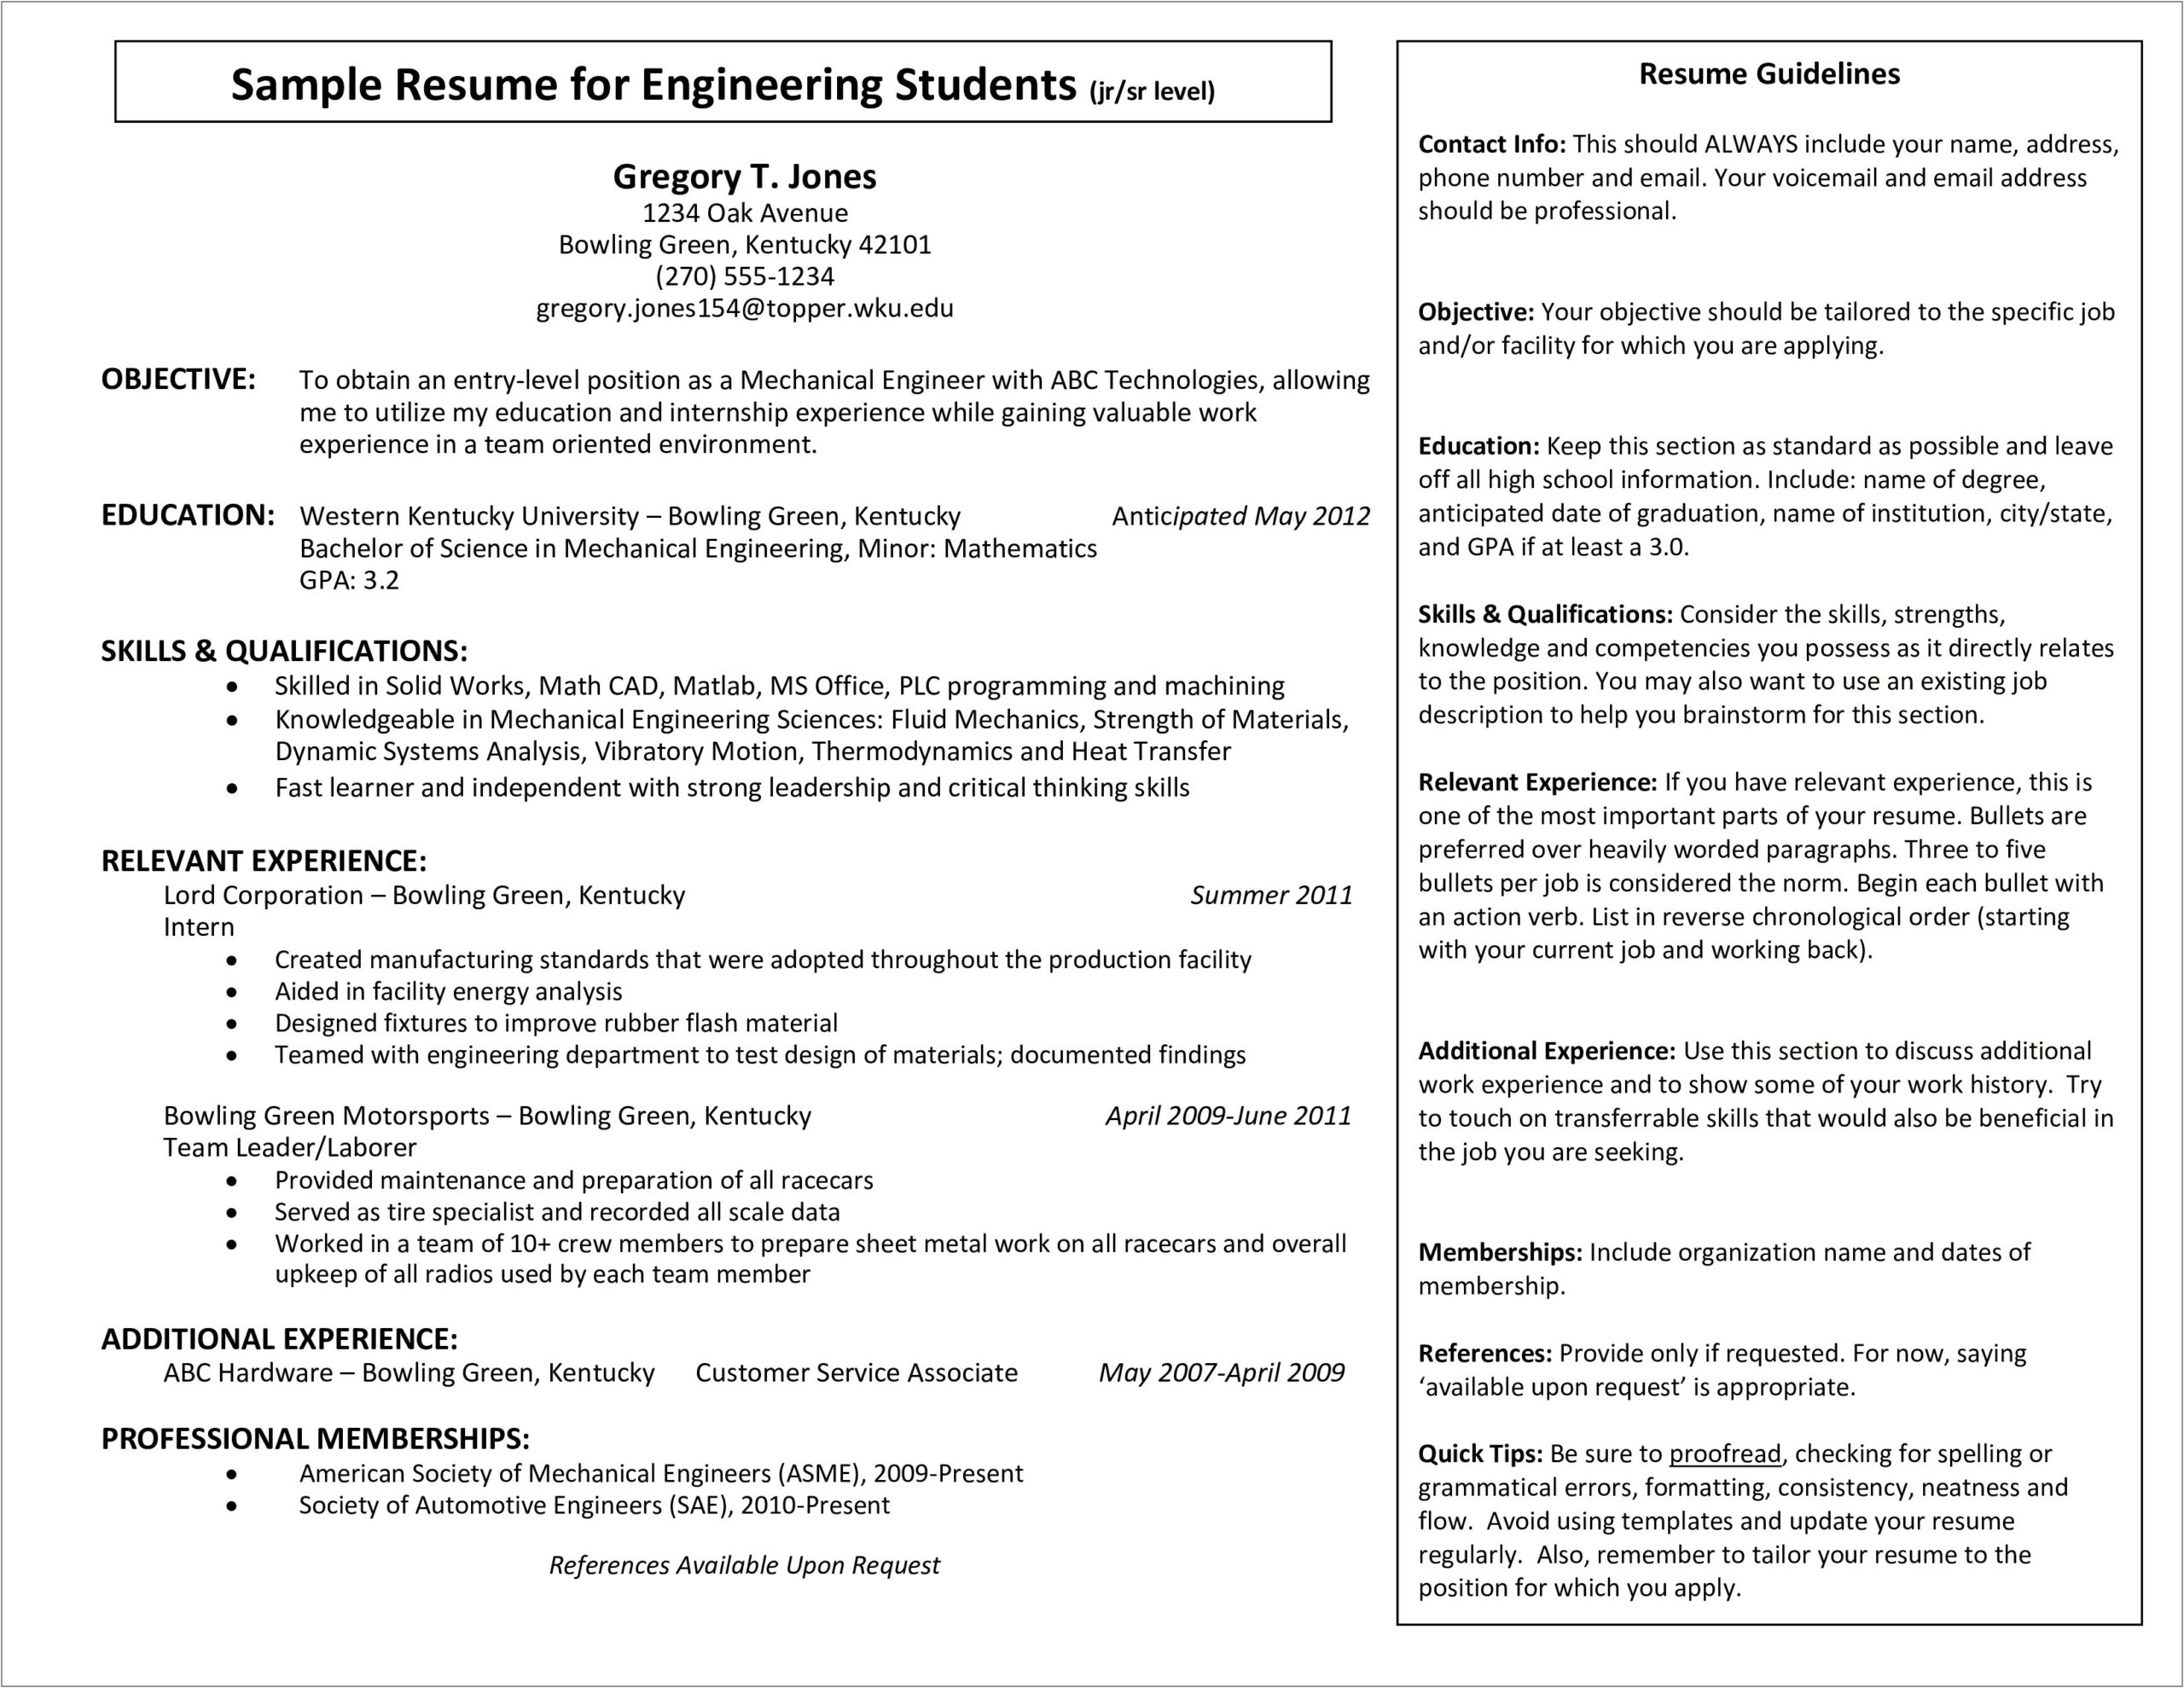 Resume Objective Examples For School Facilities